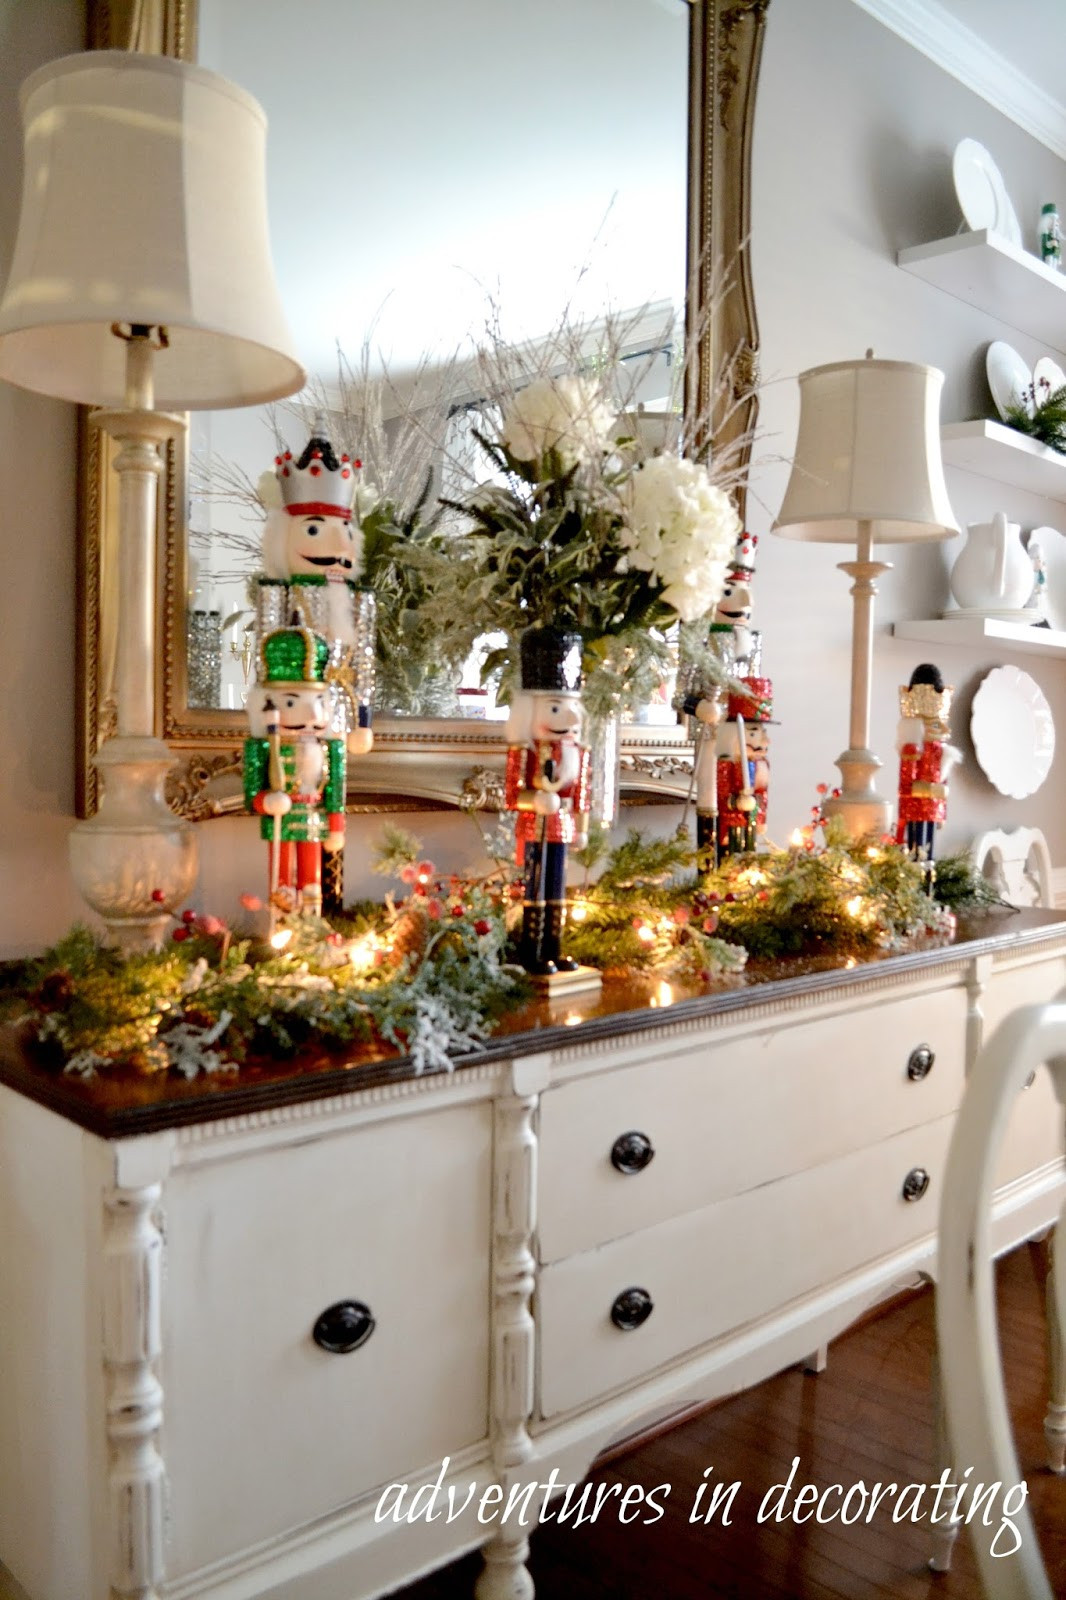 Dining Room Christmas Decorations
 Adventures in Decorating Our 2015 Christmas Dining Room